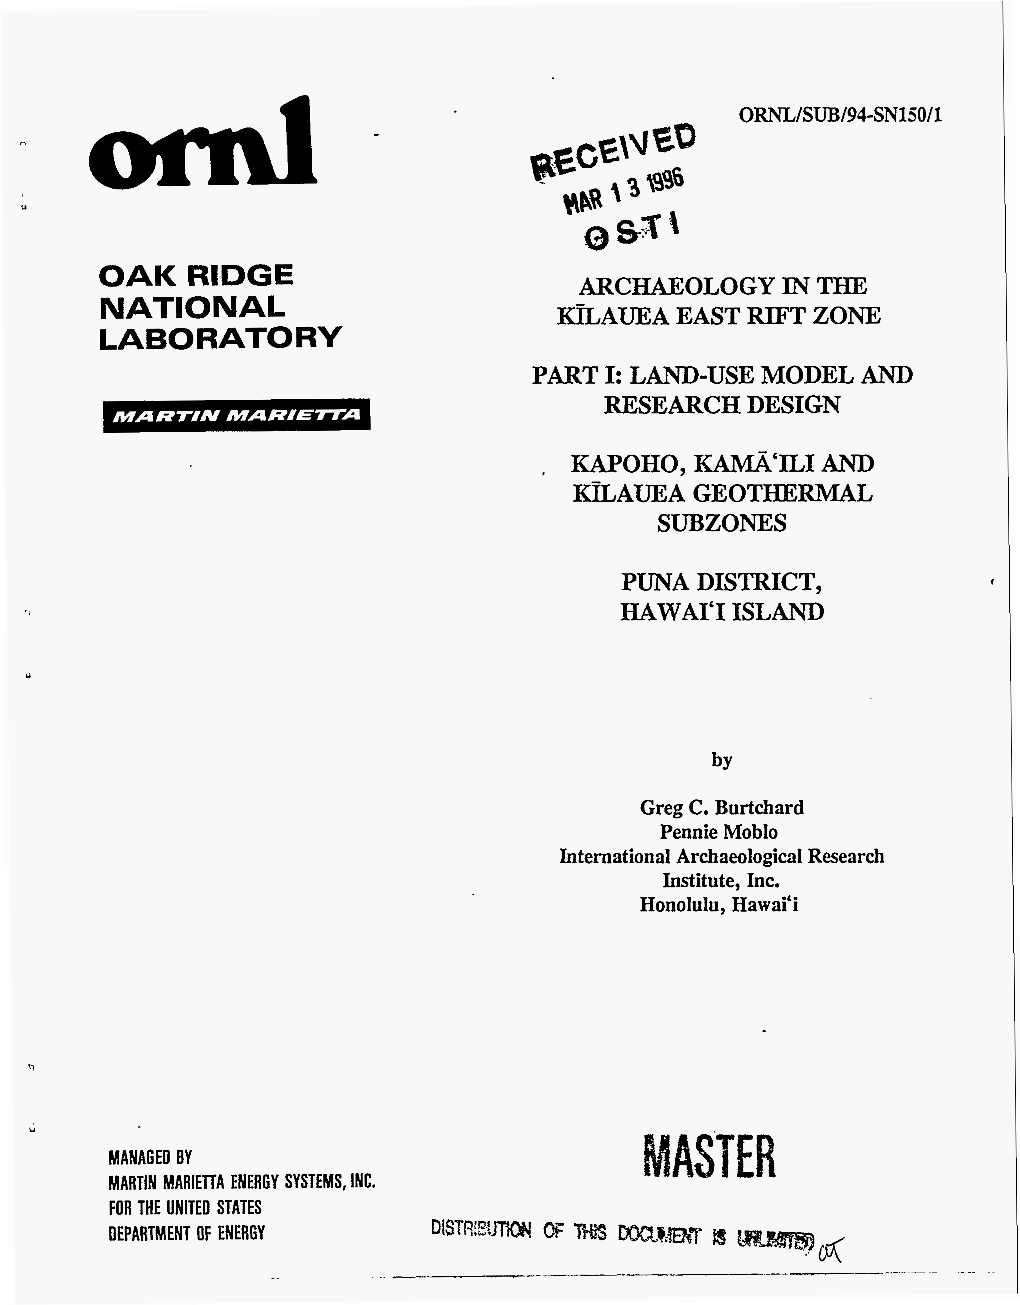 NATIONAL Kflauea EAST RIFT ZONE LABORATOR'y PART I: LAND-USE MODEL and RESEARCH DESIGN